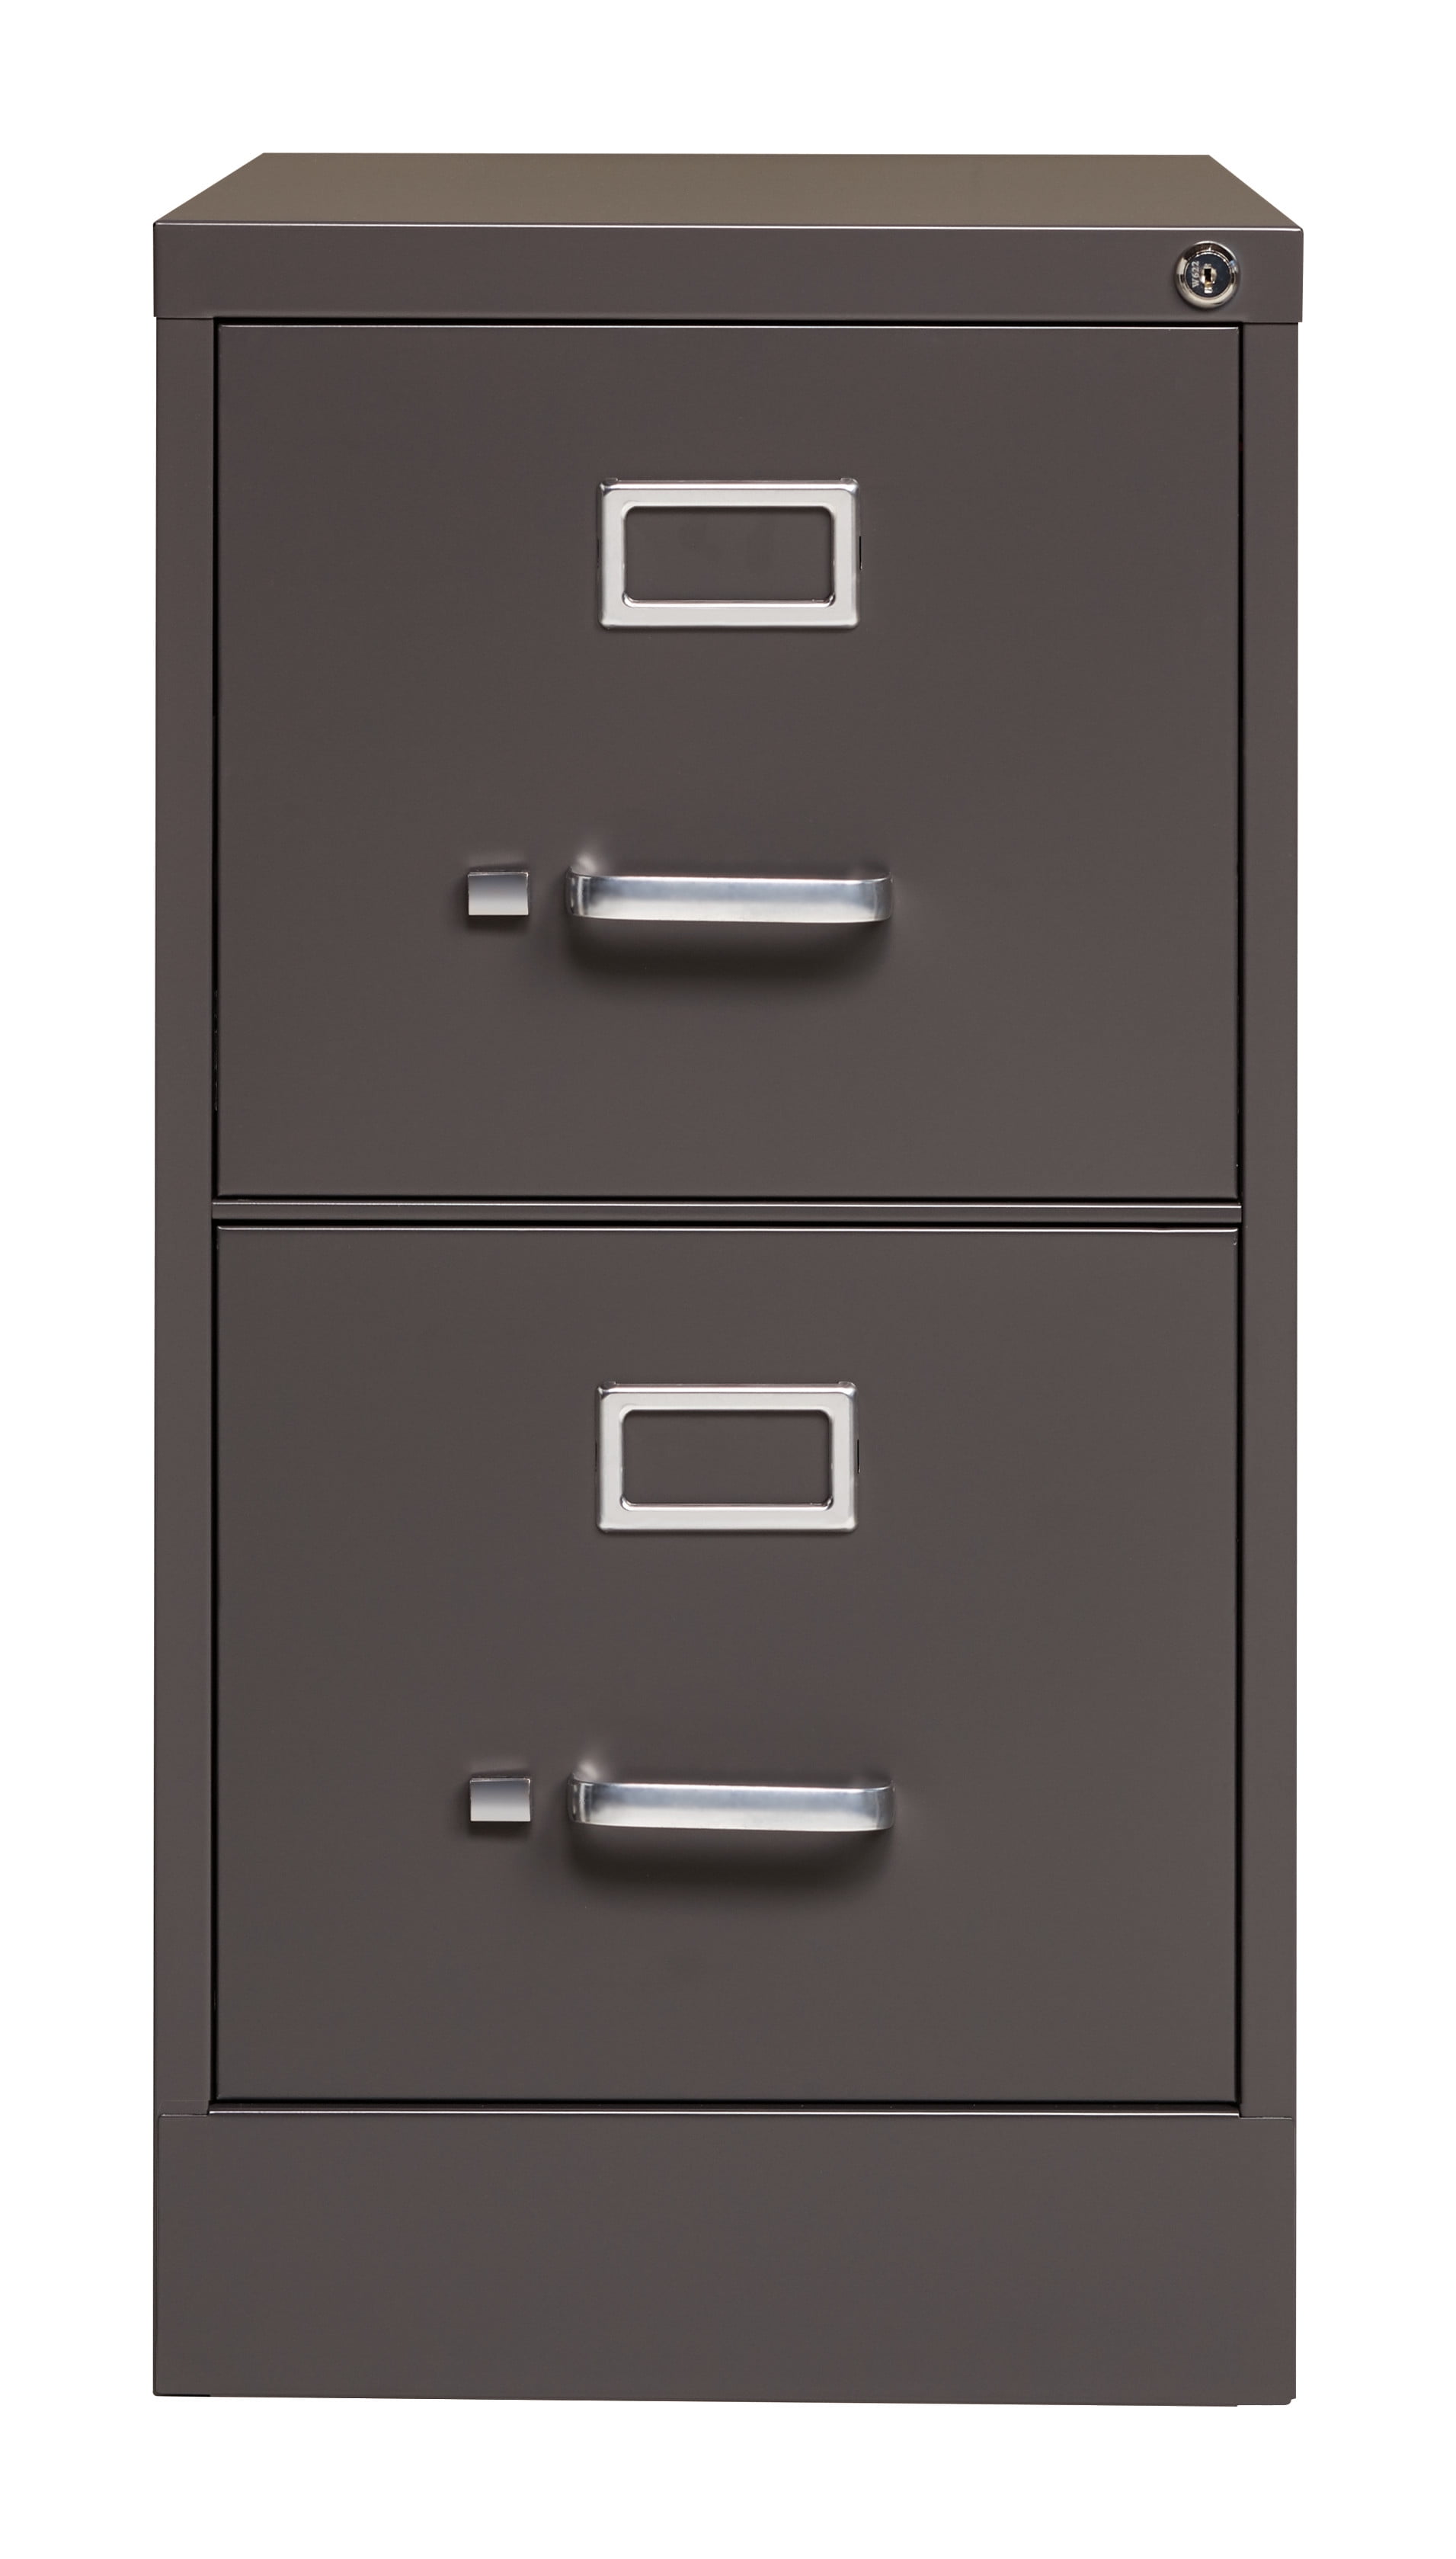 Hirsh 26.5 inch Deep 2 Drawer Letter Width Vertical File Cabinet in Charcoal 